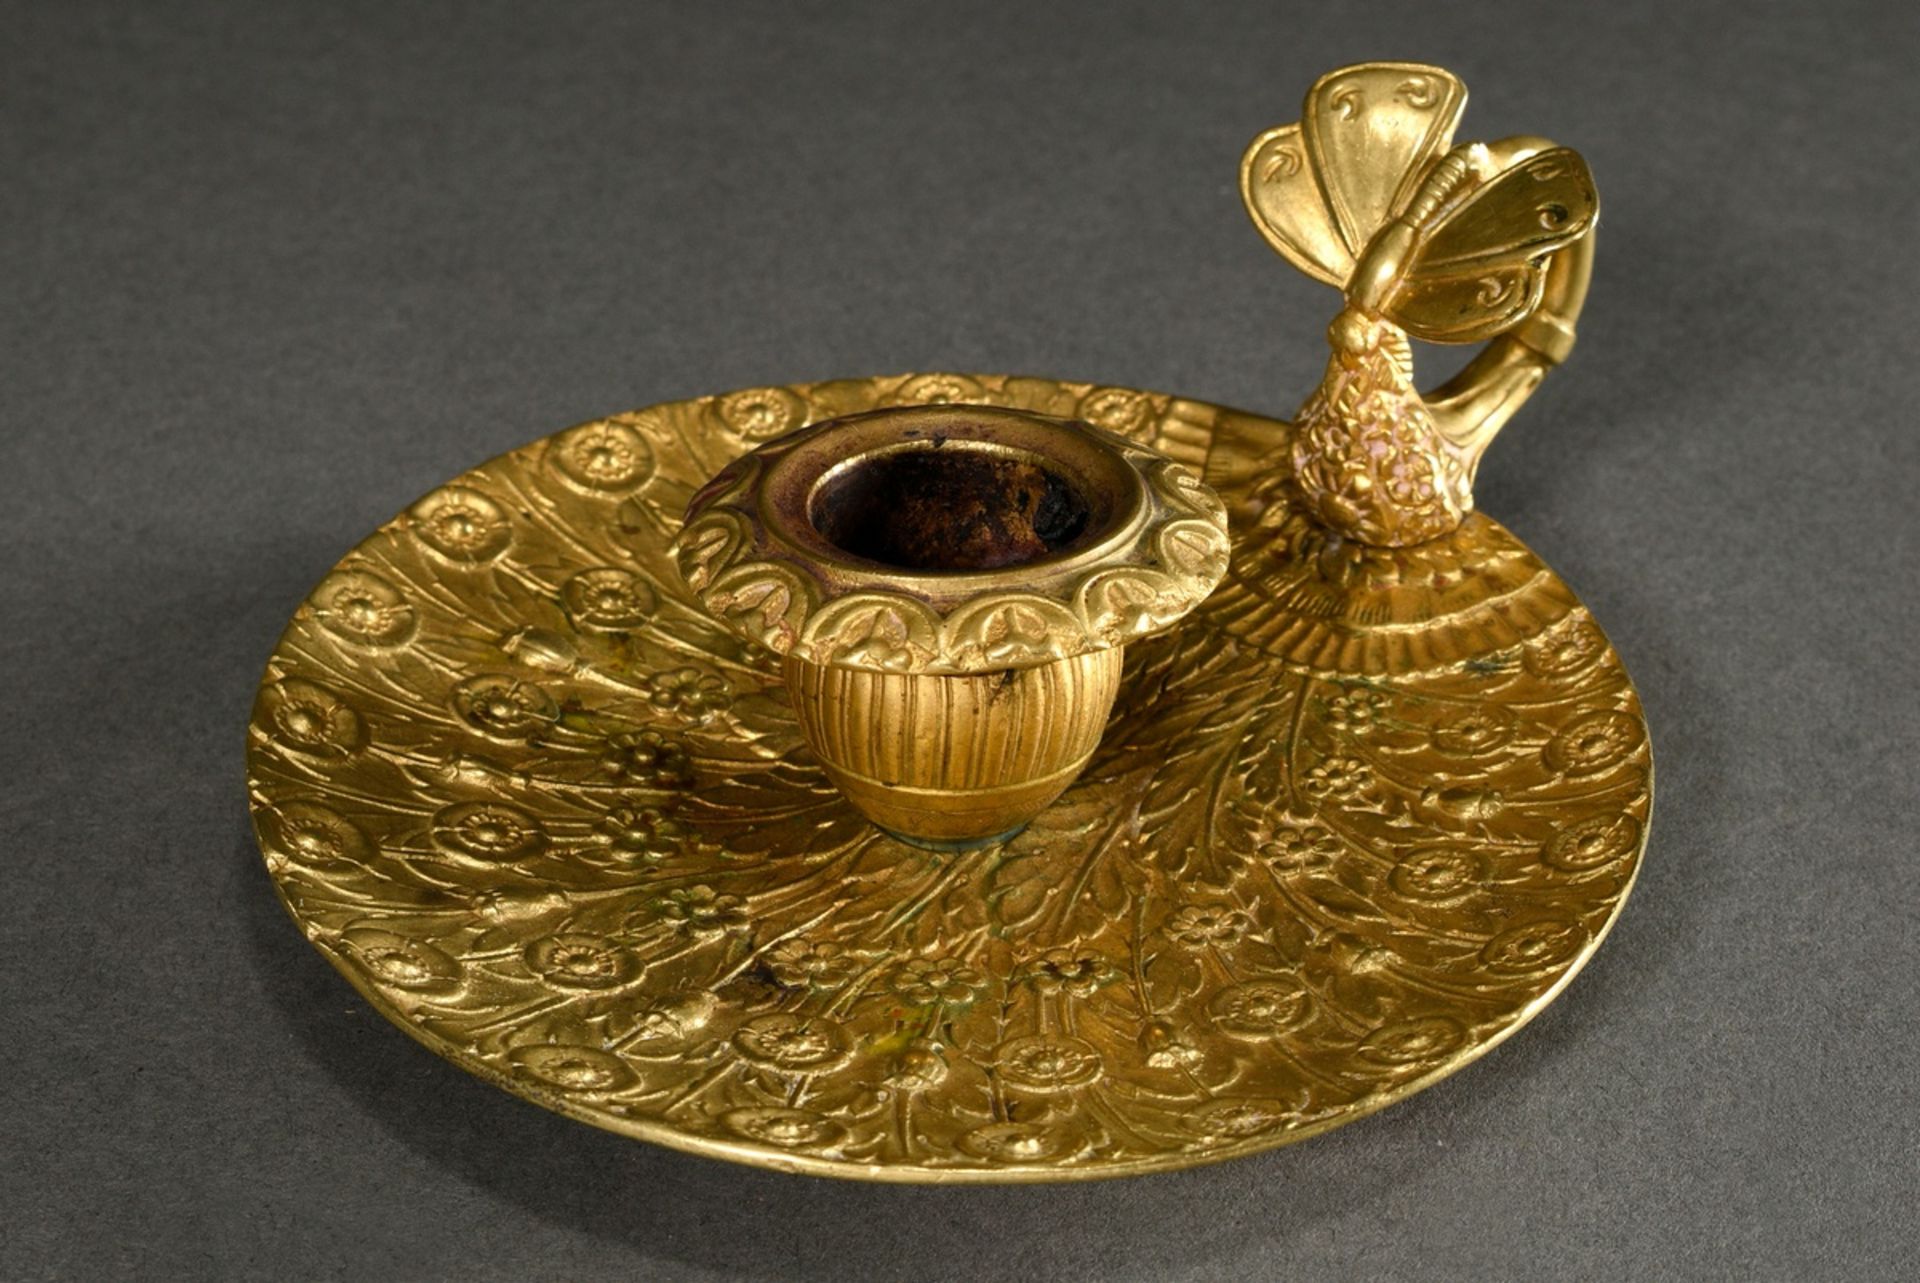 Empire hand candlestick with poppy decoration on the plate and sculpted butterfly thumb rest, gilt  - Image 4 of 4